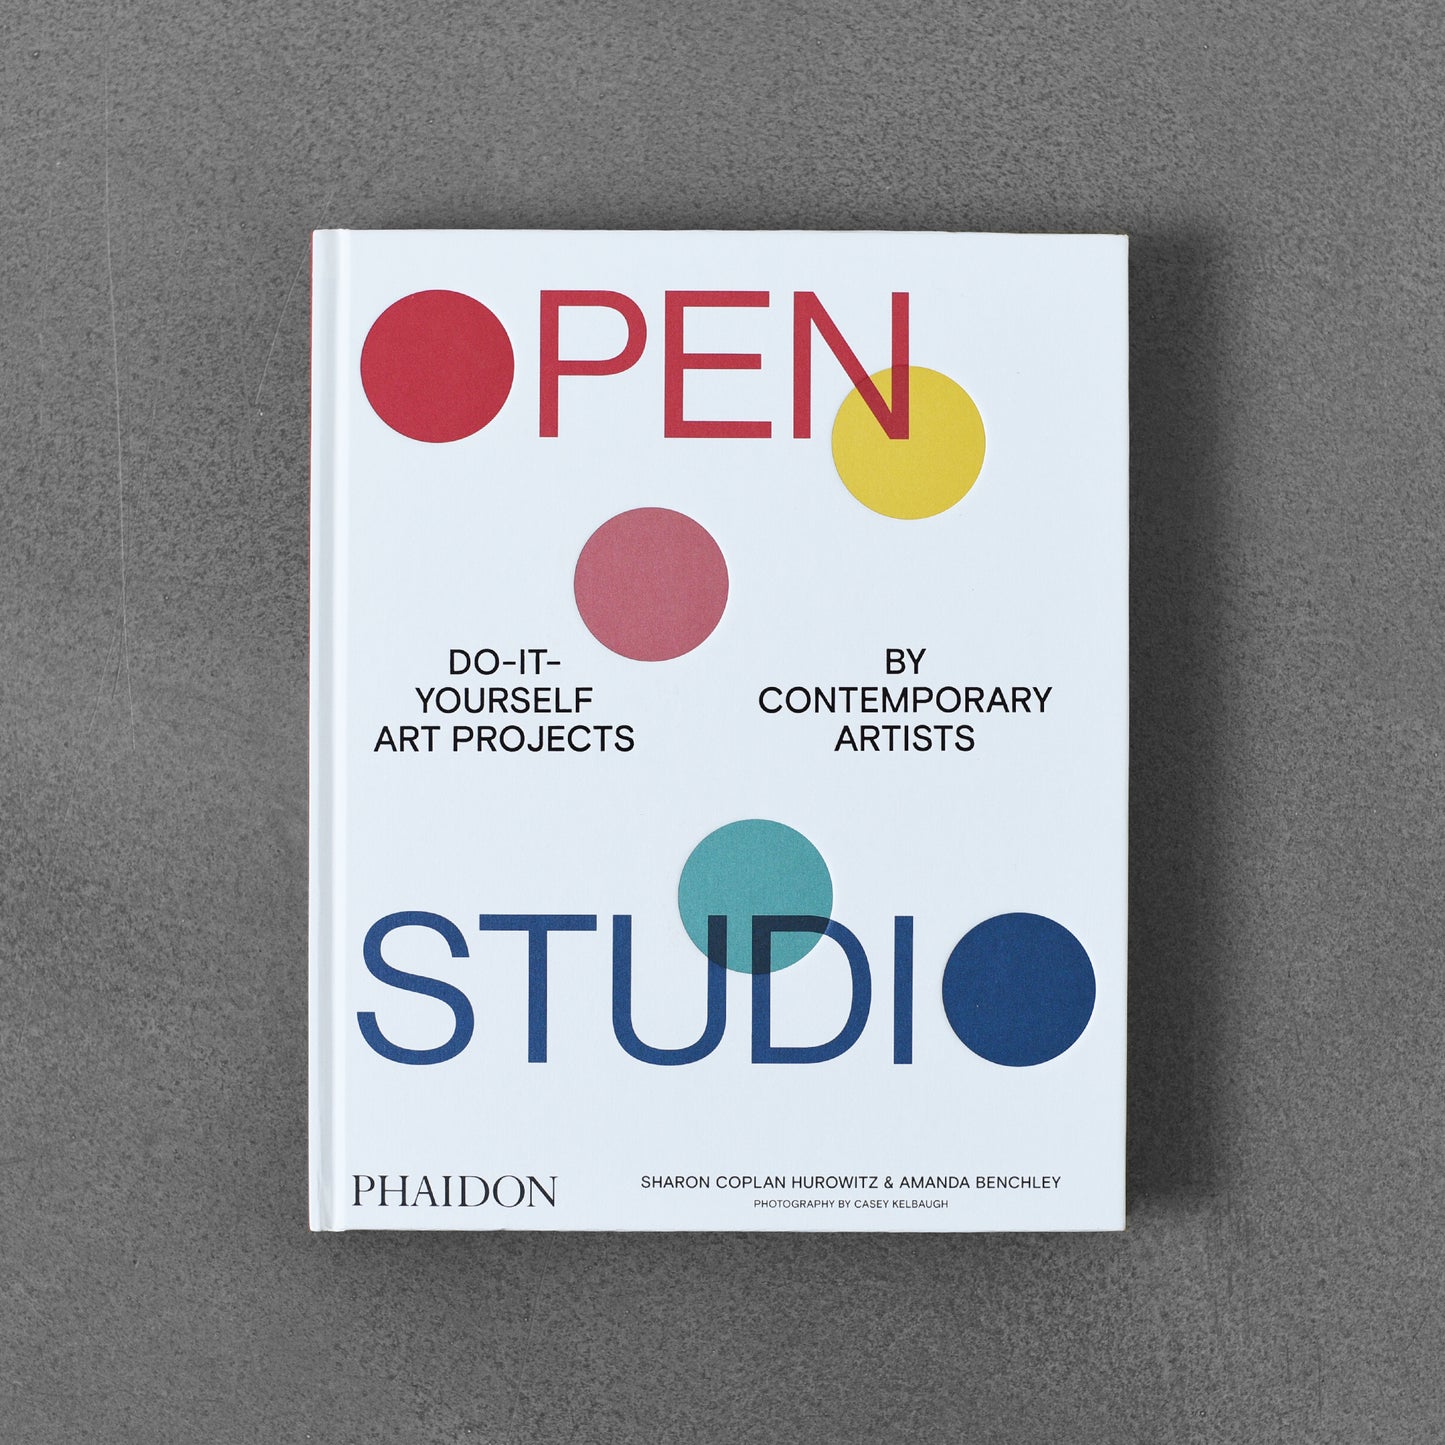 Open Studio: Do-it-yourself Art Projects by Contemporary Artists - Sharon Coplan Hurowitz, Amanda Benchley